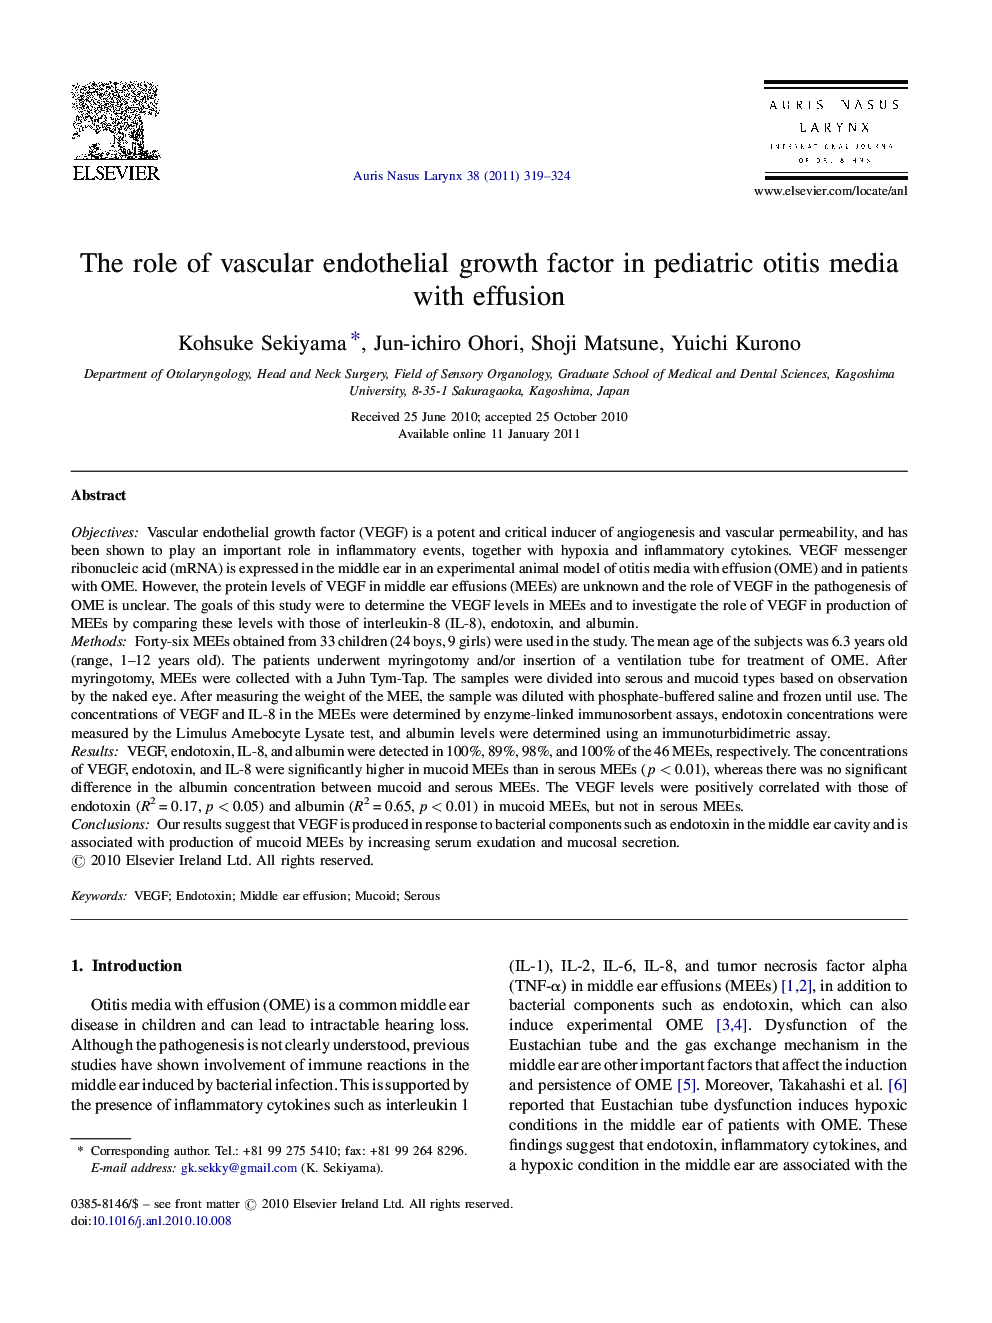 The role of vascular endothelial growth factor in pediatric otitis media with effusion